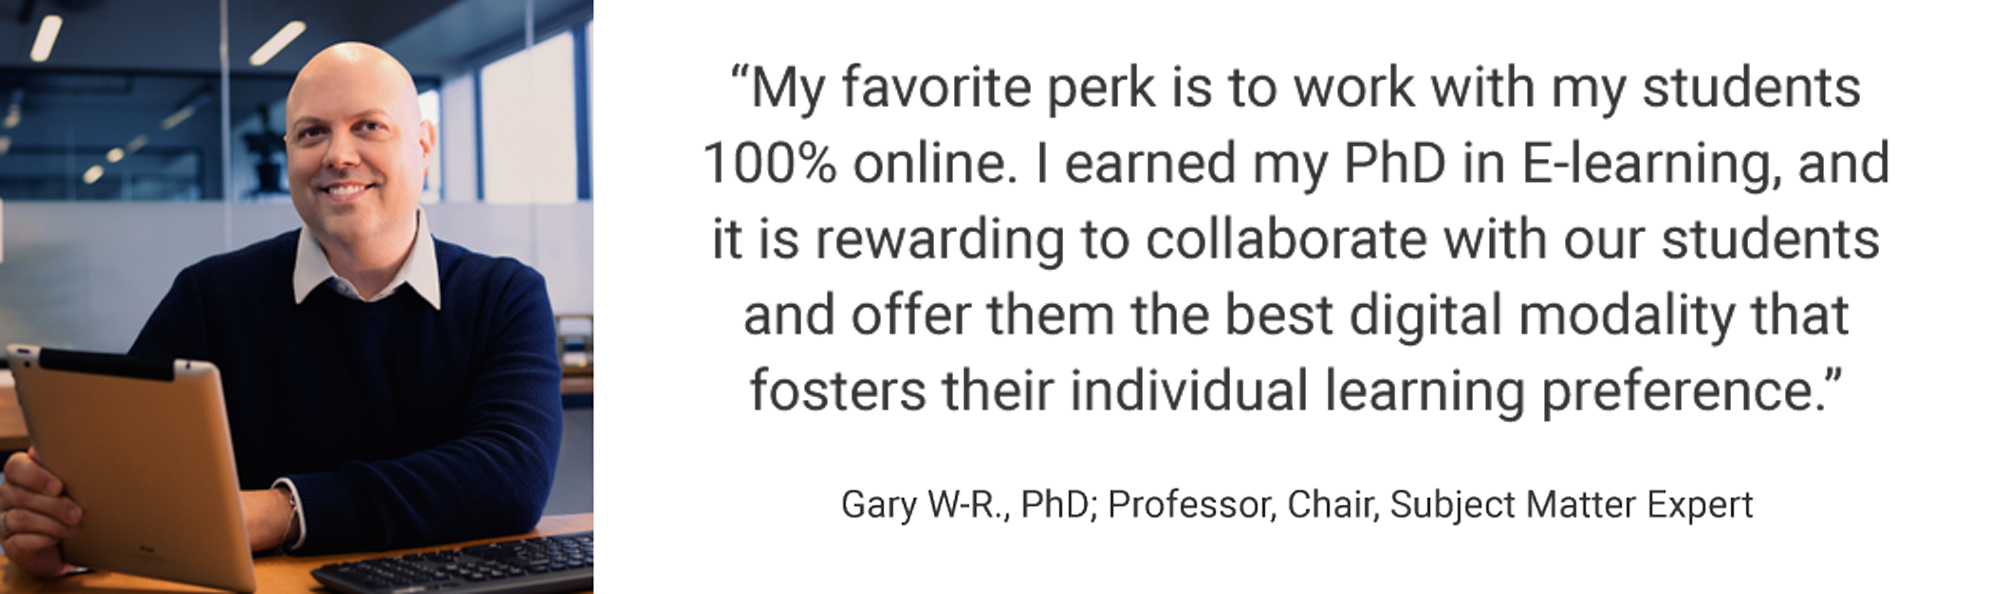 Employee Testimonial, "My favorite perk is to work with my students 100% online. I earned my PhD in E-learning, and it is rewarding to collaborate with our students and offer them the best digital modality that fosters their individual learning preference." Gary W-R., PhD; Professor, Chair, Subject Matter Expert